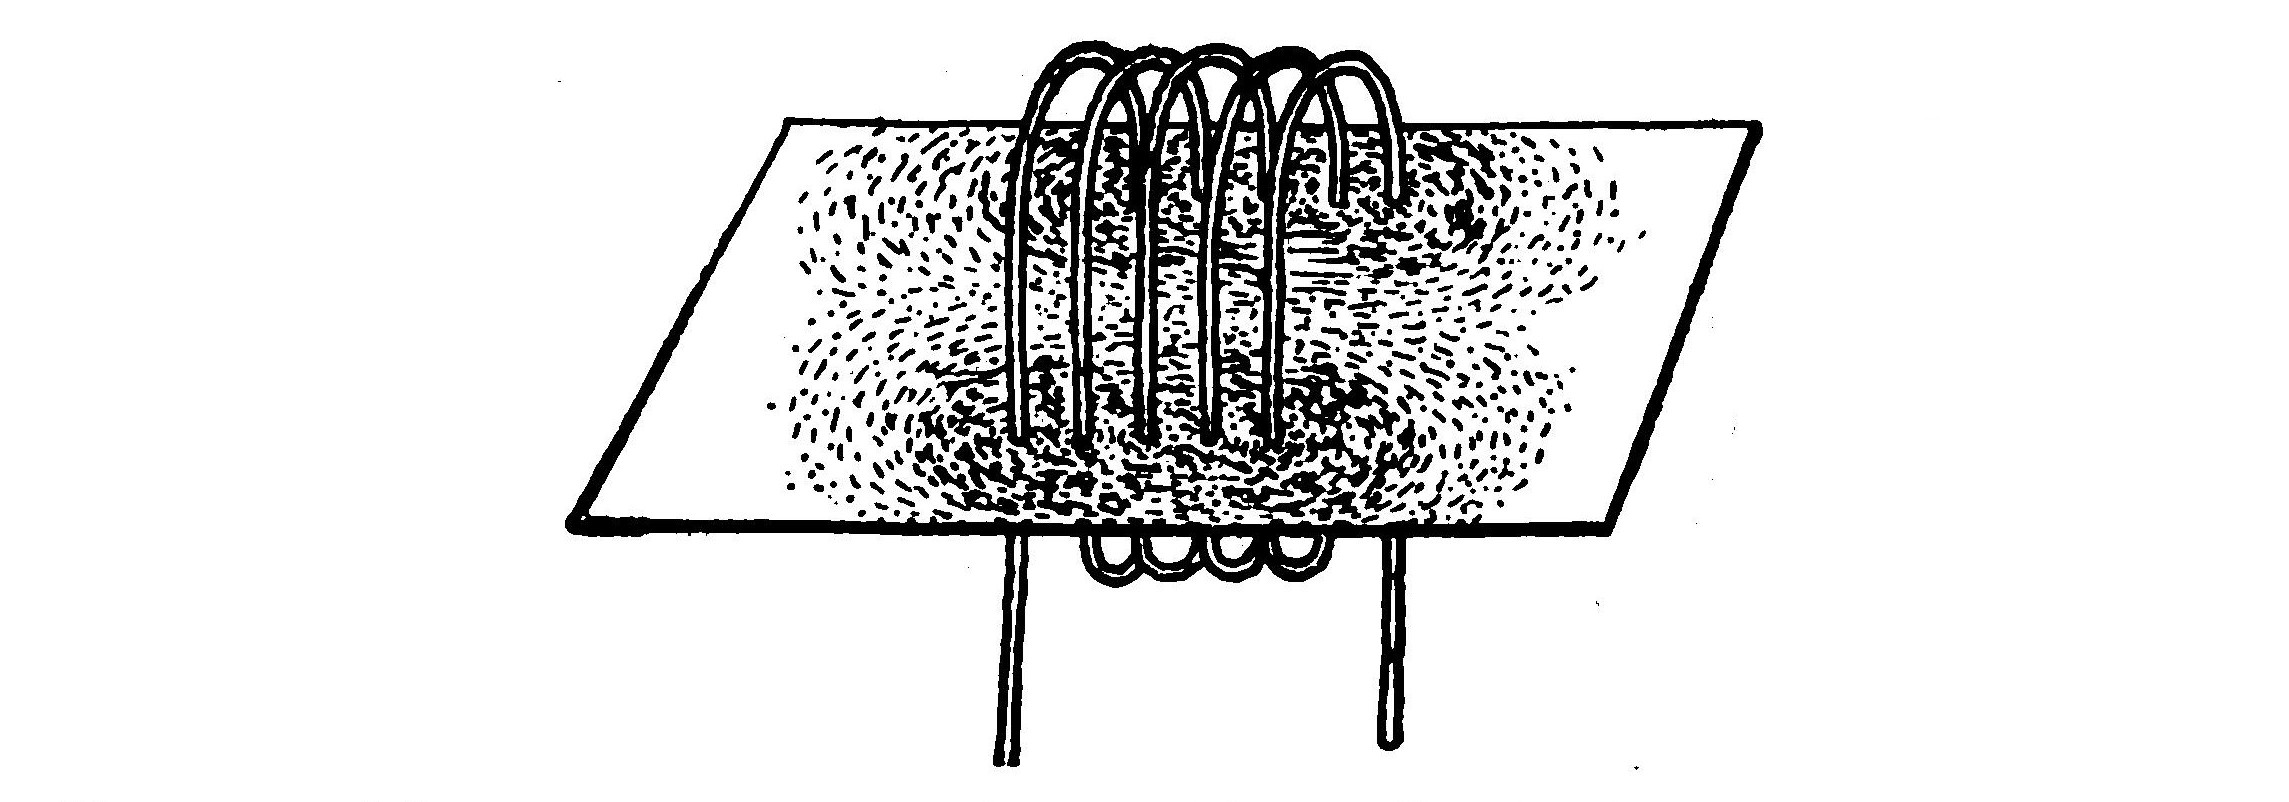 FIG. 33.—Magnetic phantom formed by coil of wire carrying current.